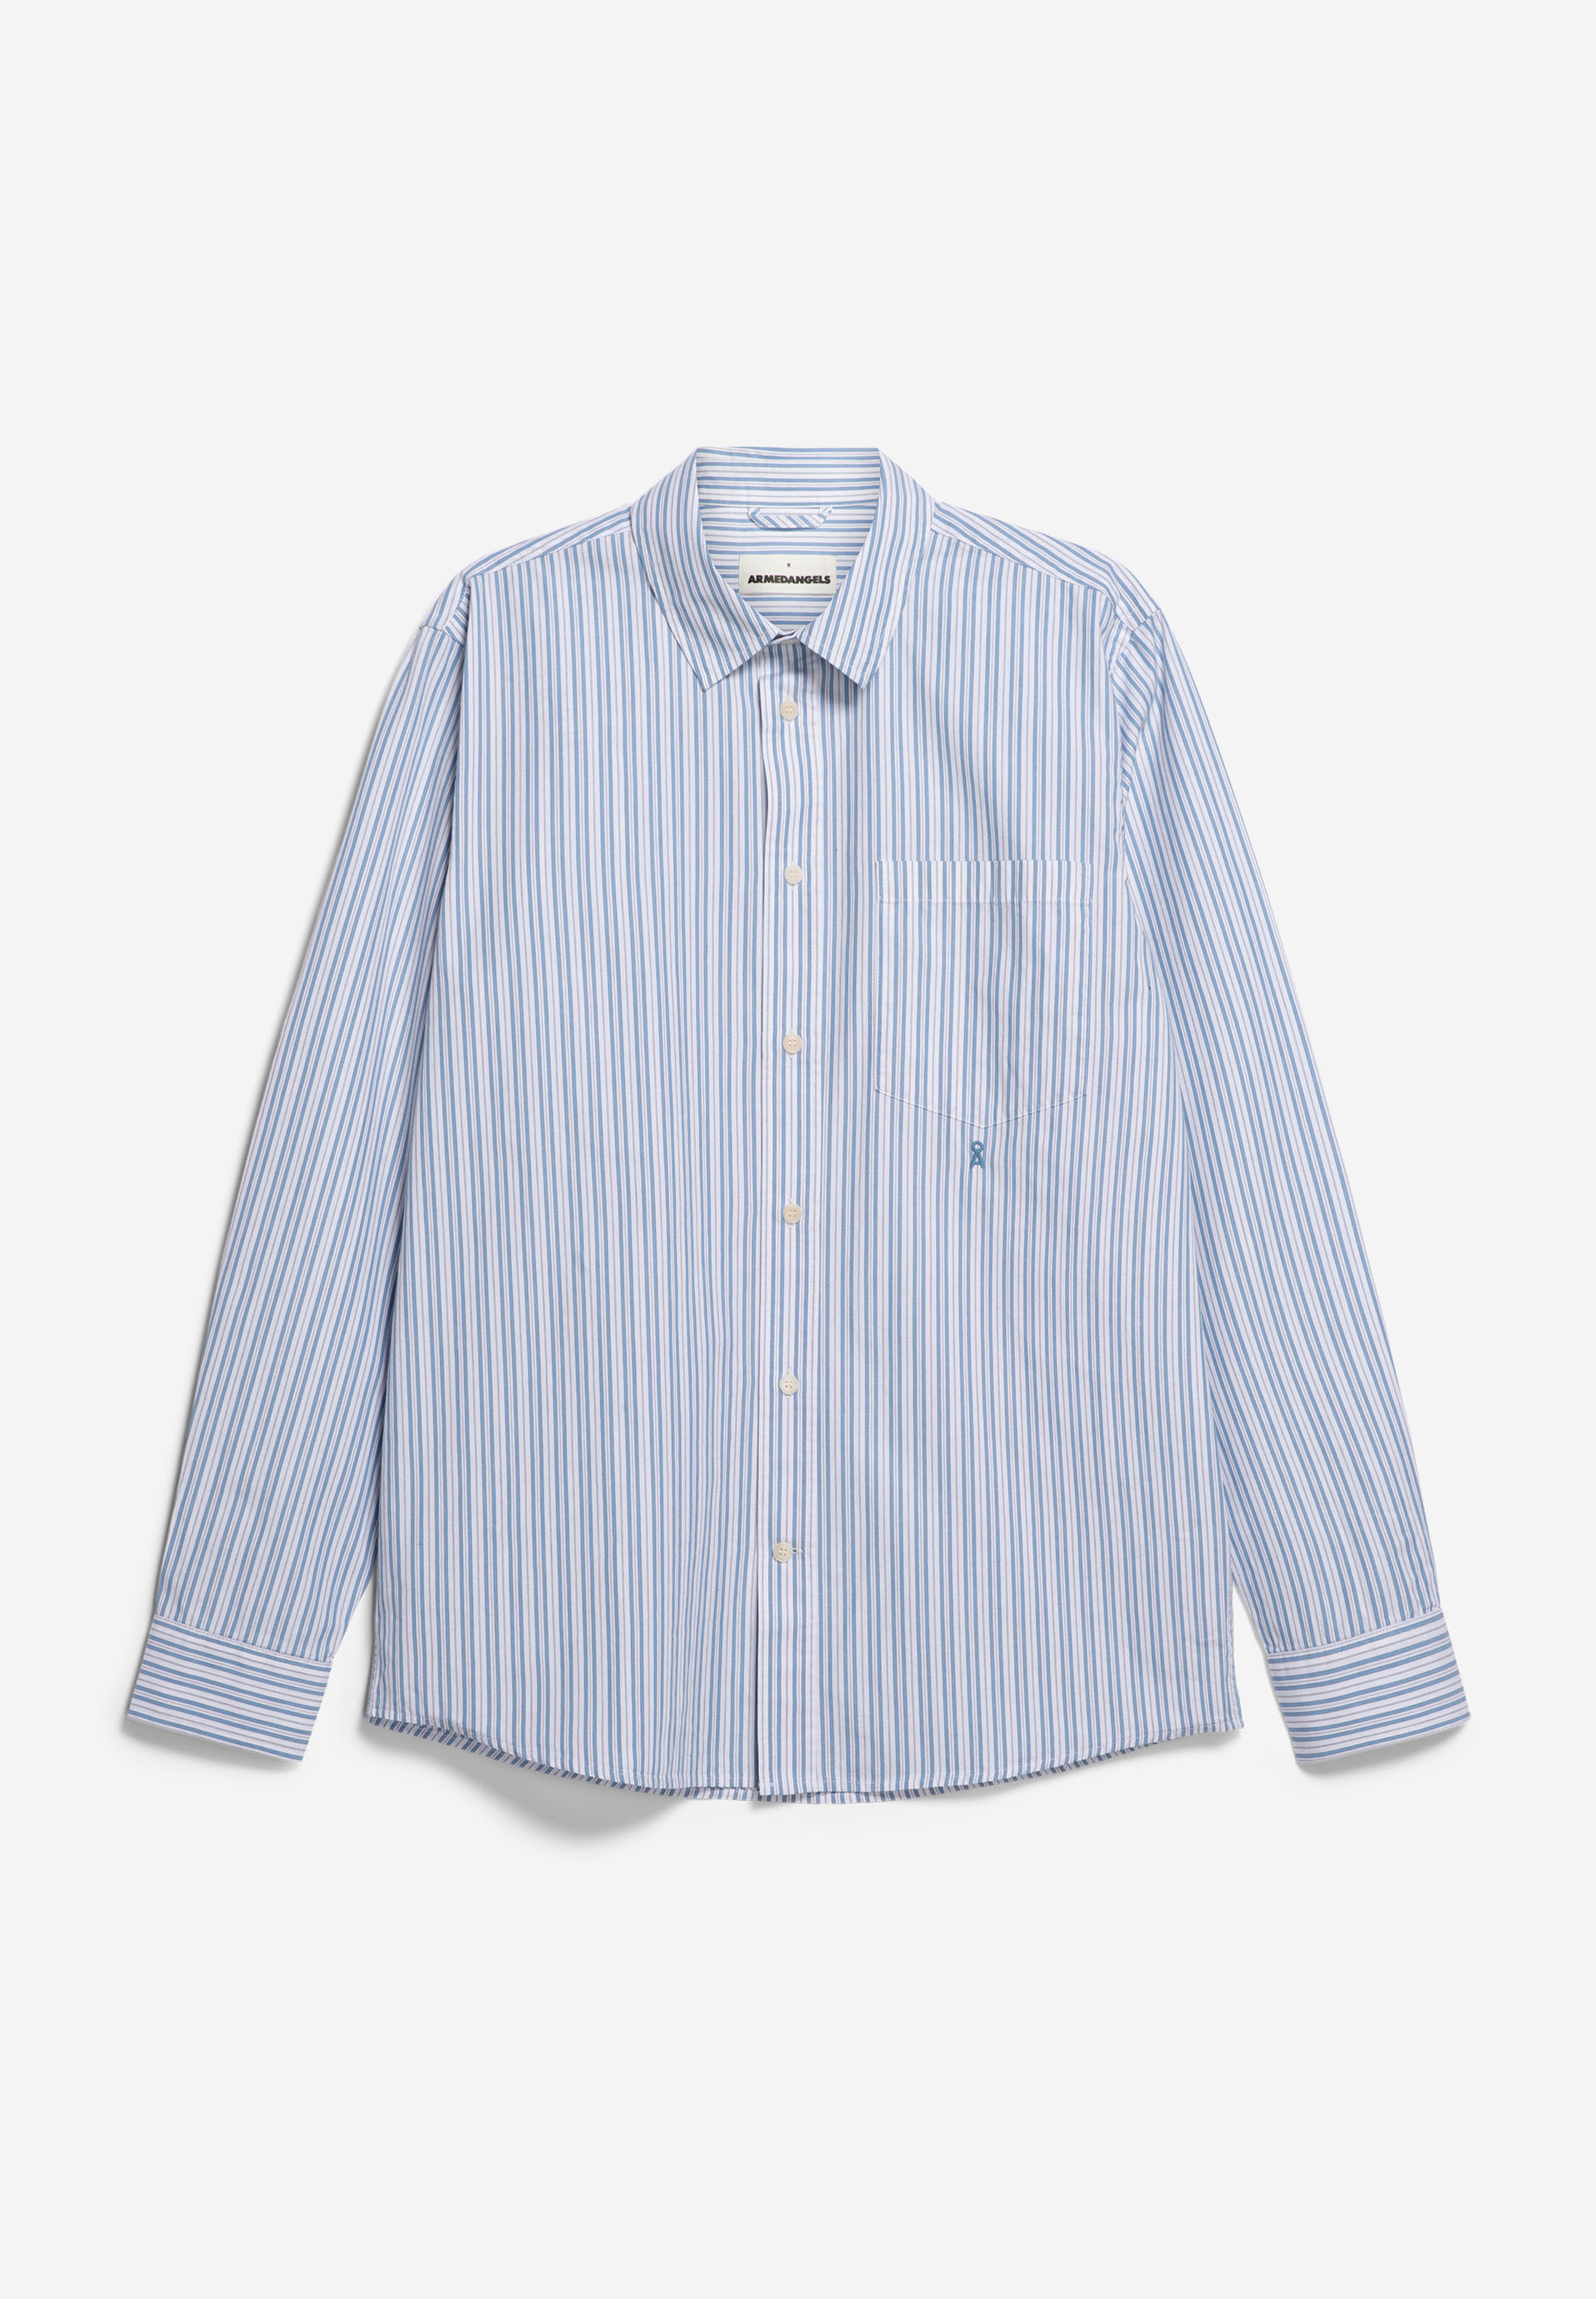 SAANTIO Shirt Relaxed Fit made of Organic Cotton